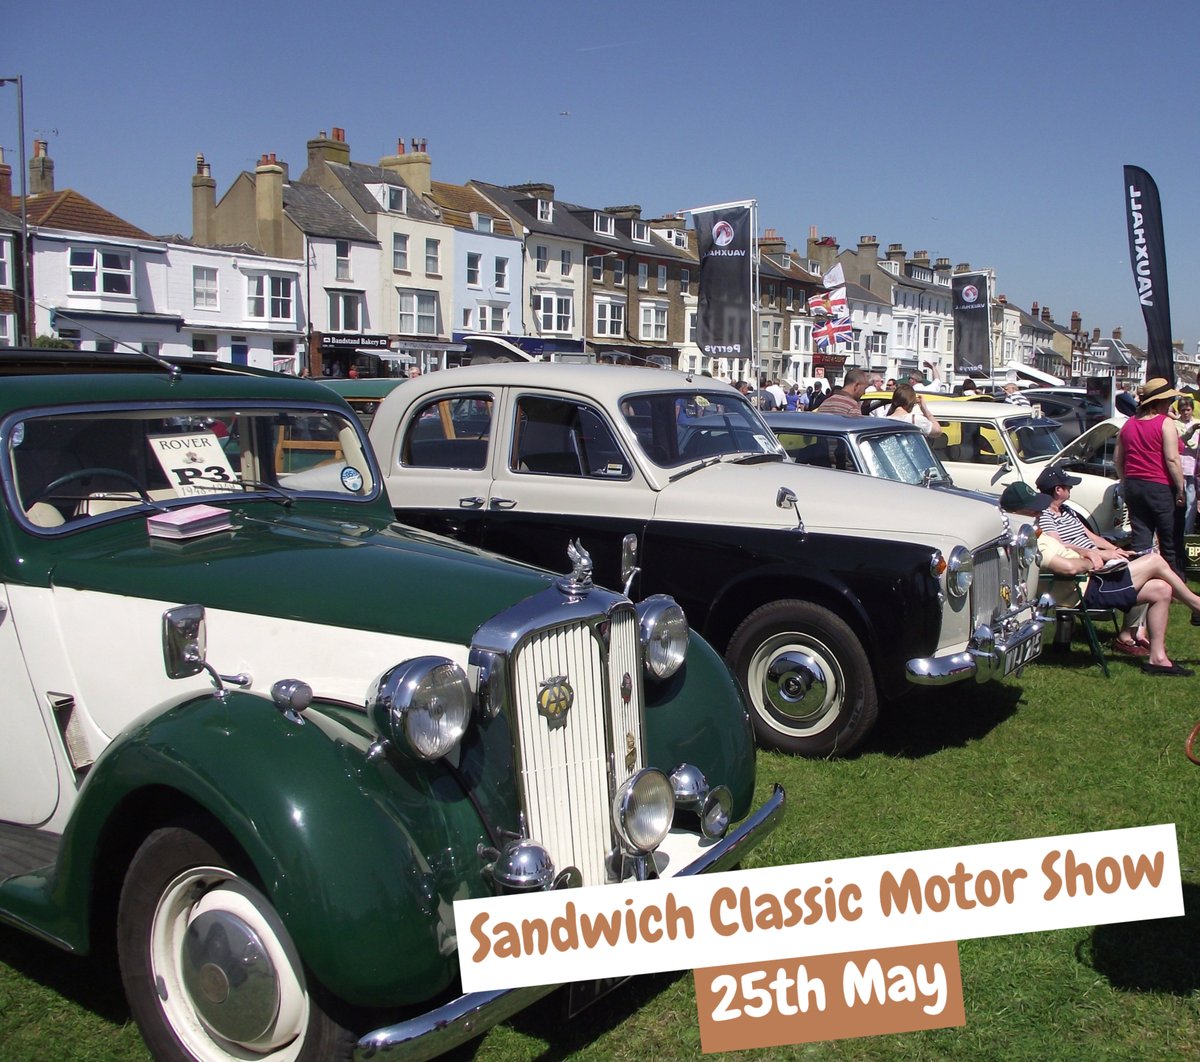 Sandwich Classic Motor Show 2024 Saturday 25th May, from 10:00am – 3:00pm at @STSKent A trip down memory lane with 100s of classic vehicles from 1920's onwards. eventbrite.co.uk/e/sandwich-cla… #sandwich #sandwichkent #kent #thanet #classic #classiccar #classiccars #motor #classicmusic